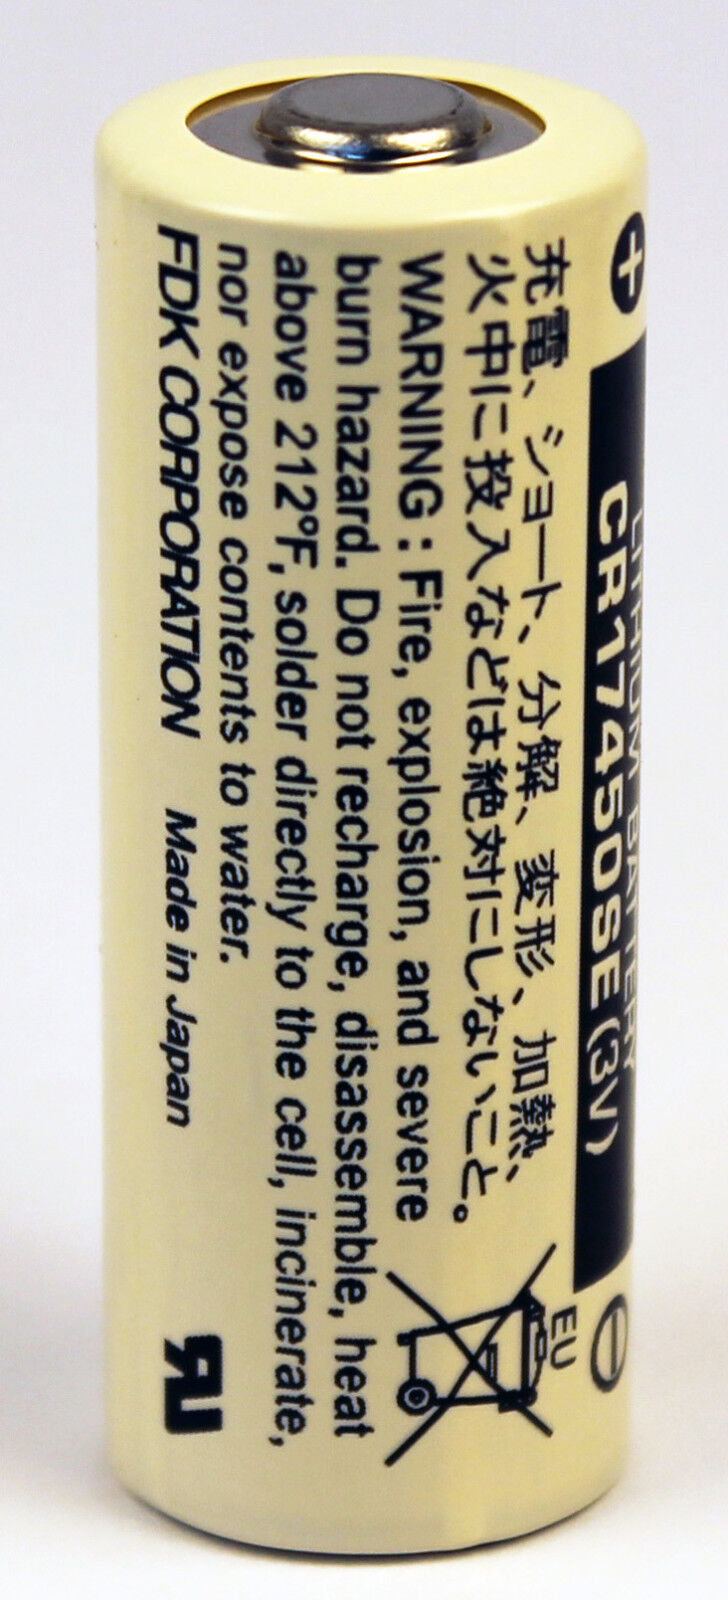 2PC FDK CR17450SE A 250mah Lithium Battery Made in Japan, Size A, CR17450SET, 3V